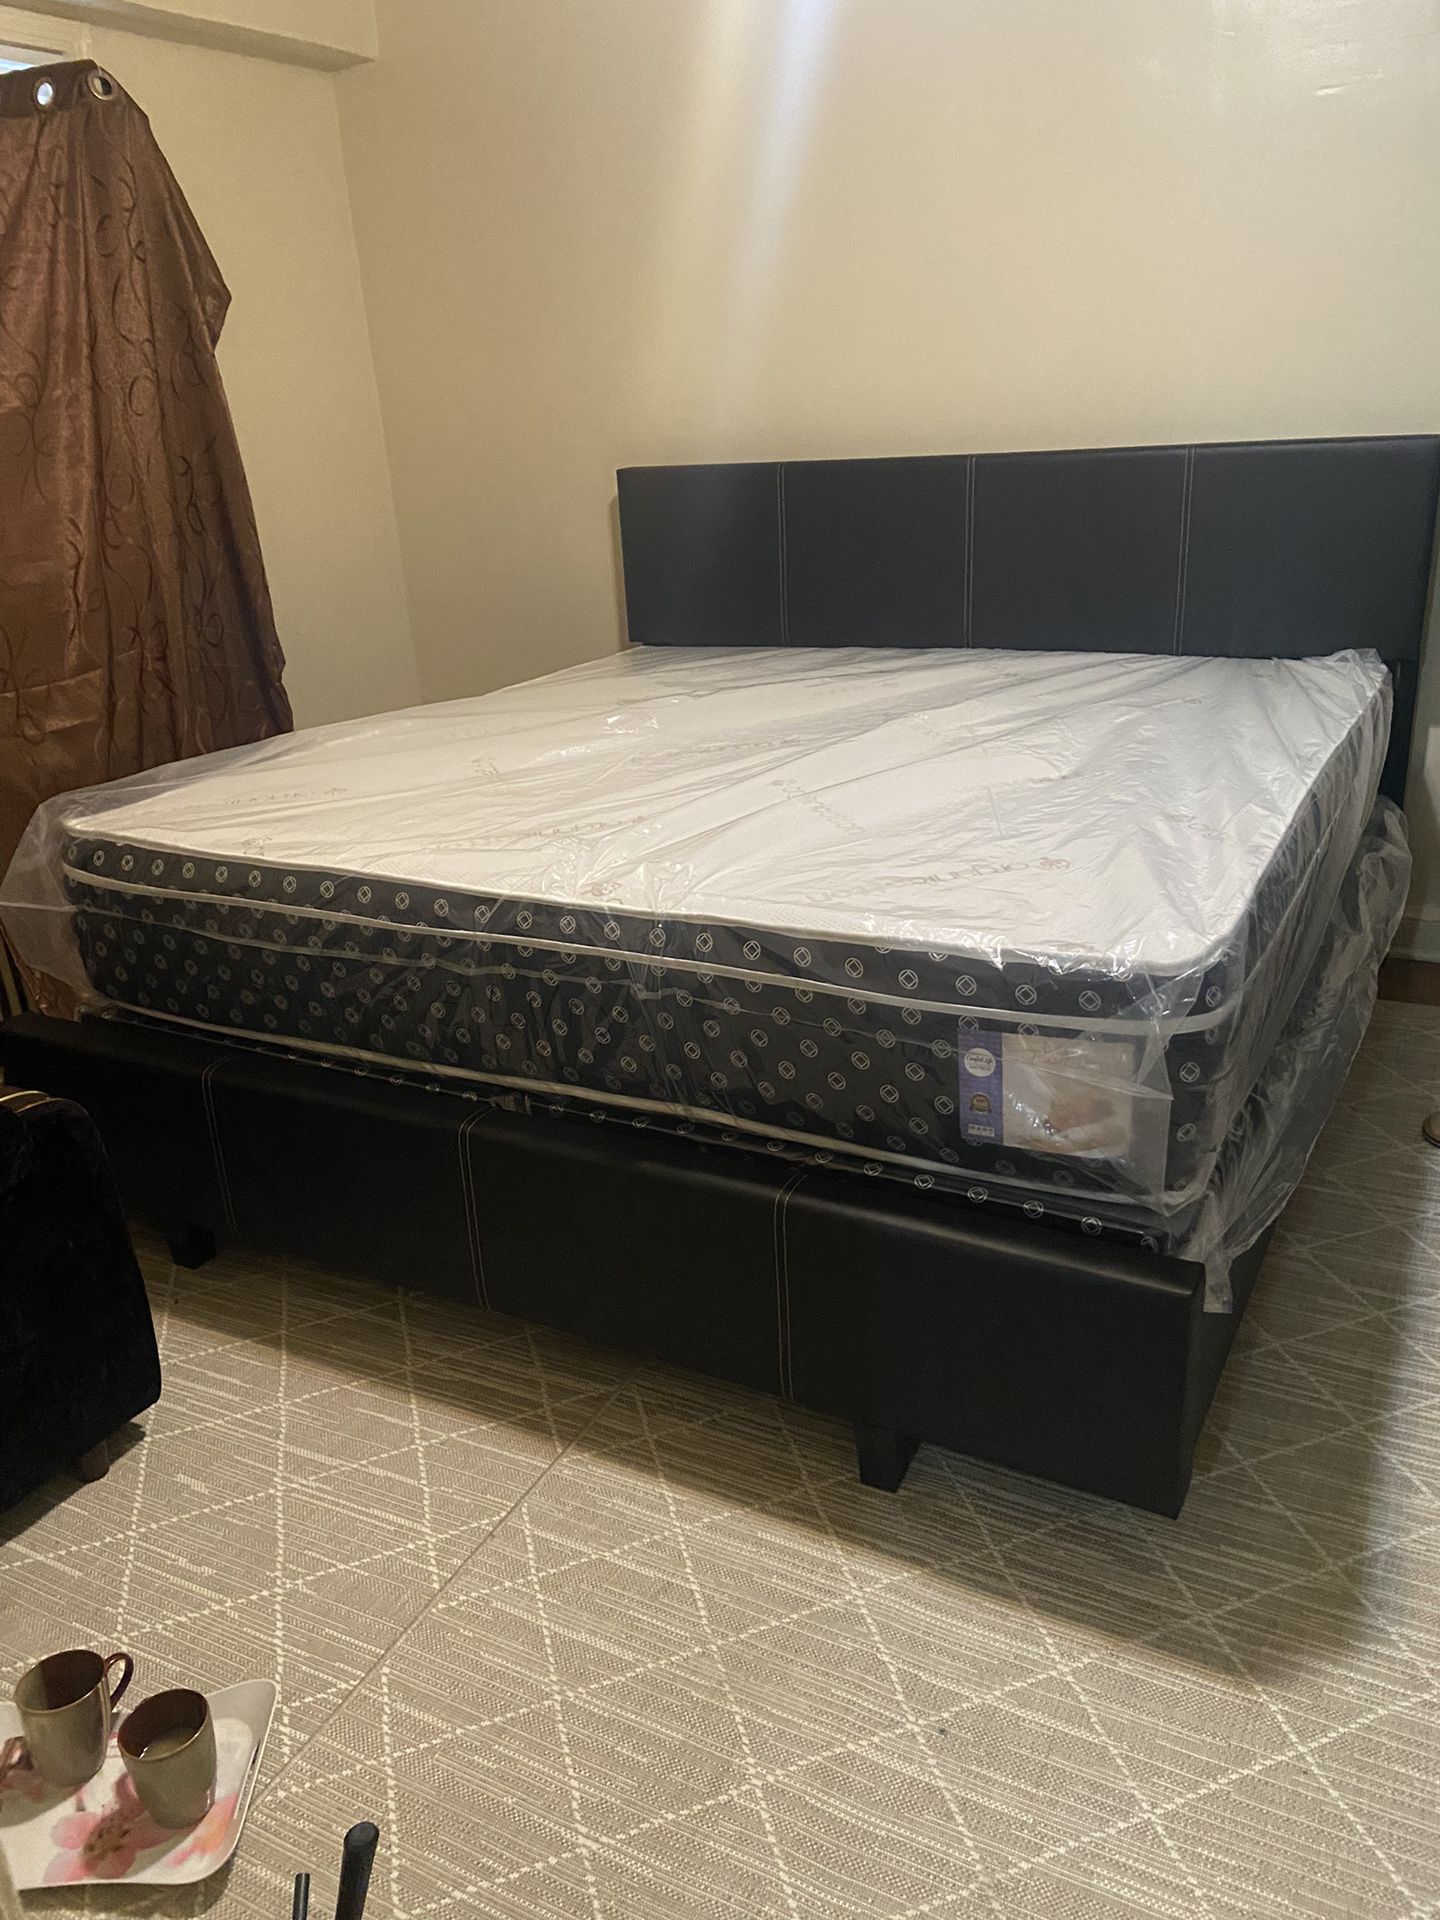 Queen Mattress Come With Bed 🛏️ Frame And Free Box Spring - Free Delivery 🚚 Today To Reasonable Distance